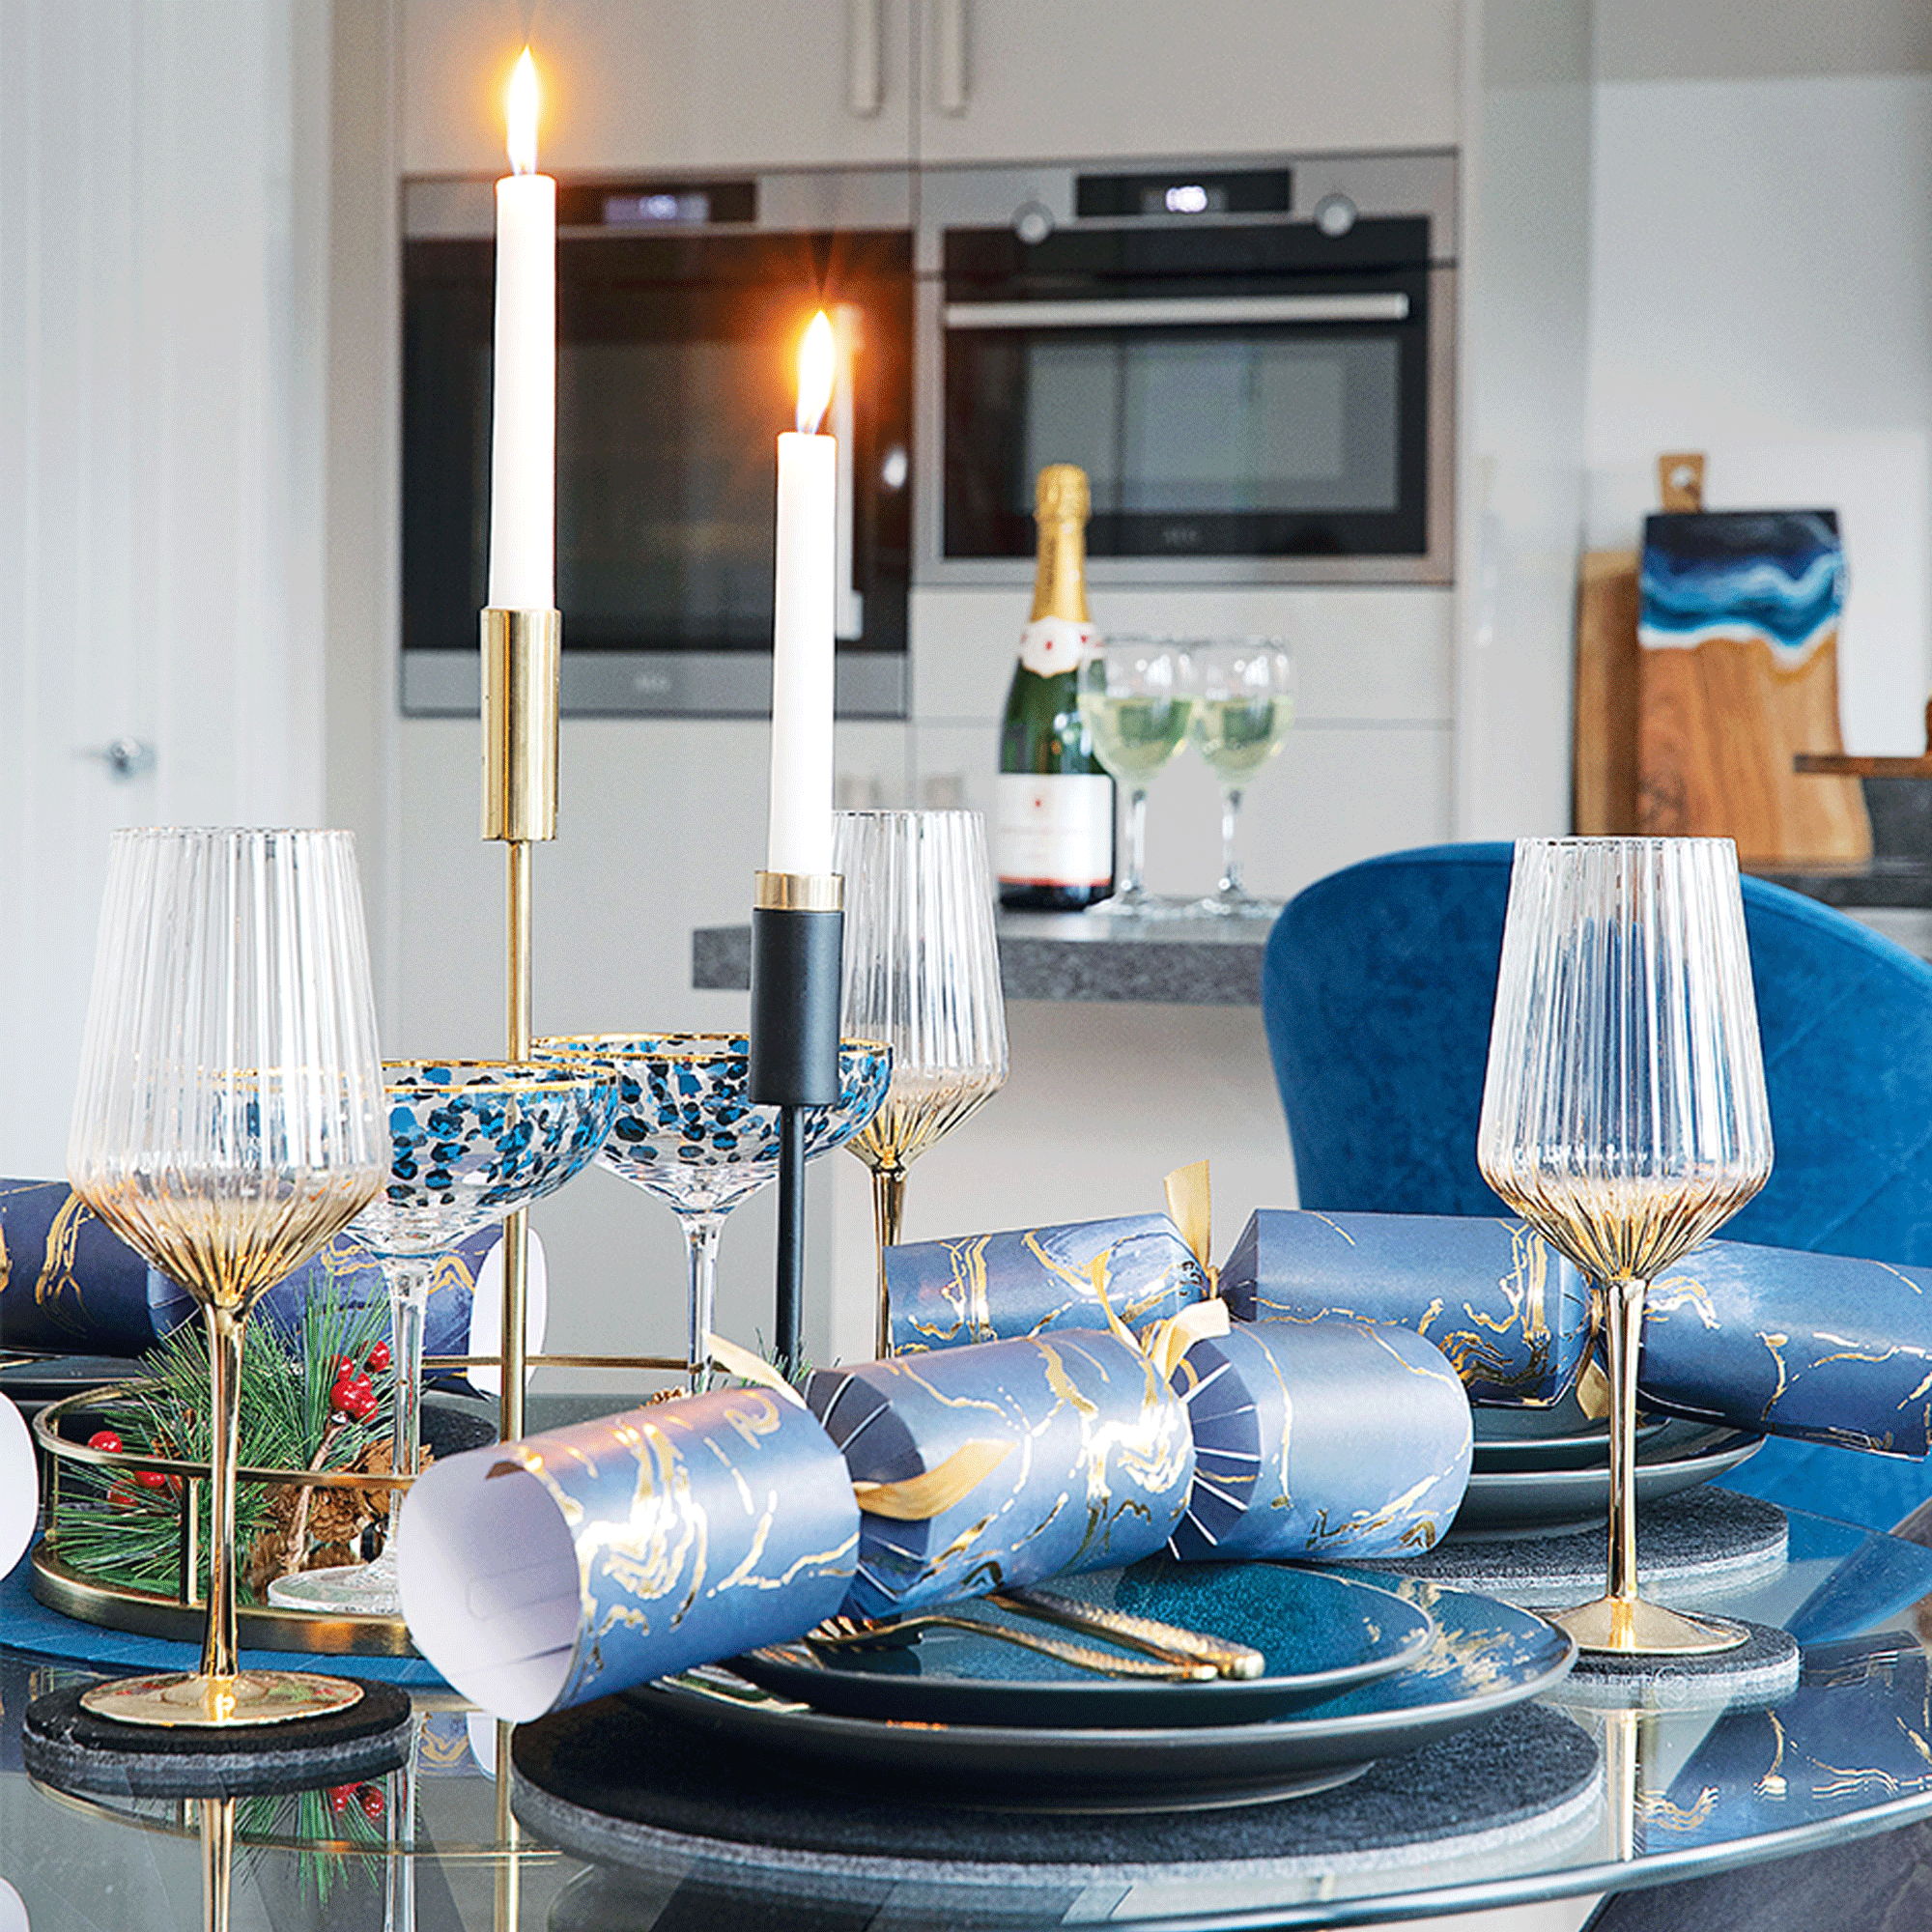 Glass table with candle sticks and blue chairs